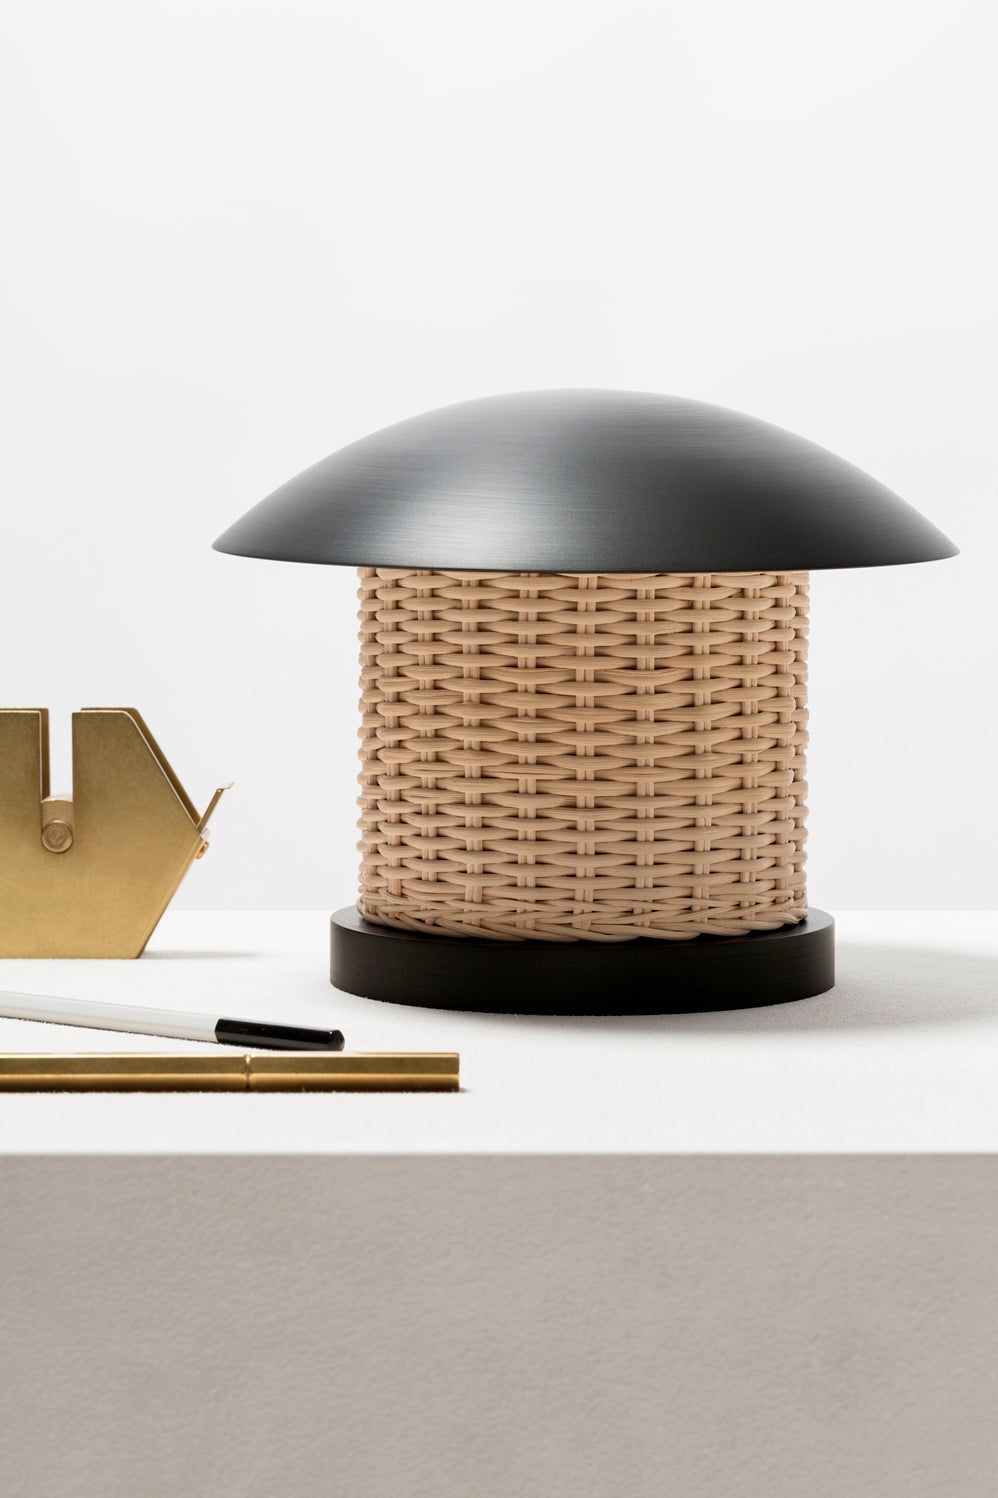 Giobagnara x Stéphane Parmentier Duomo Table Lamp | Vintage-inspired Design with Modern Minimalism | Sculptural Appearance with Geometrical Volumes | Crafted with Curved Bronze Lampshades and Woven Rattan Bases | Casts Soft Ambient Light for Reading and Lounging | Available at 2Jour Concierge, #1 luxury high-end gift & lifestyle shop